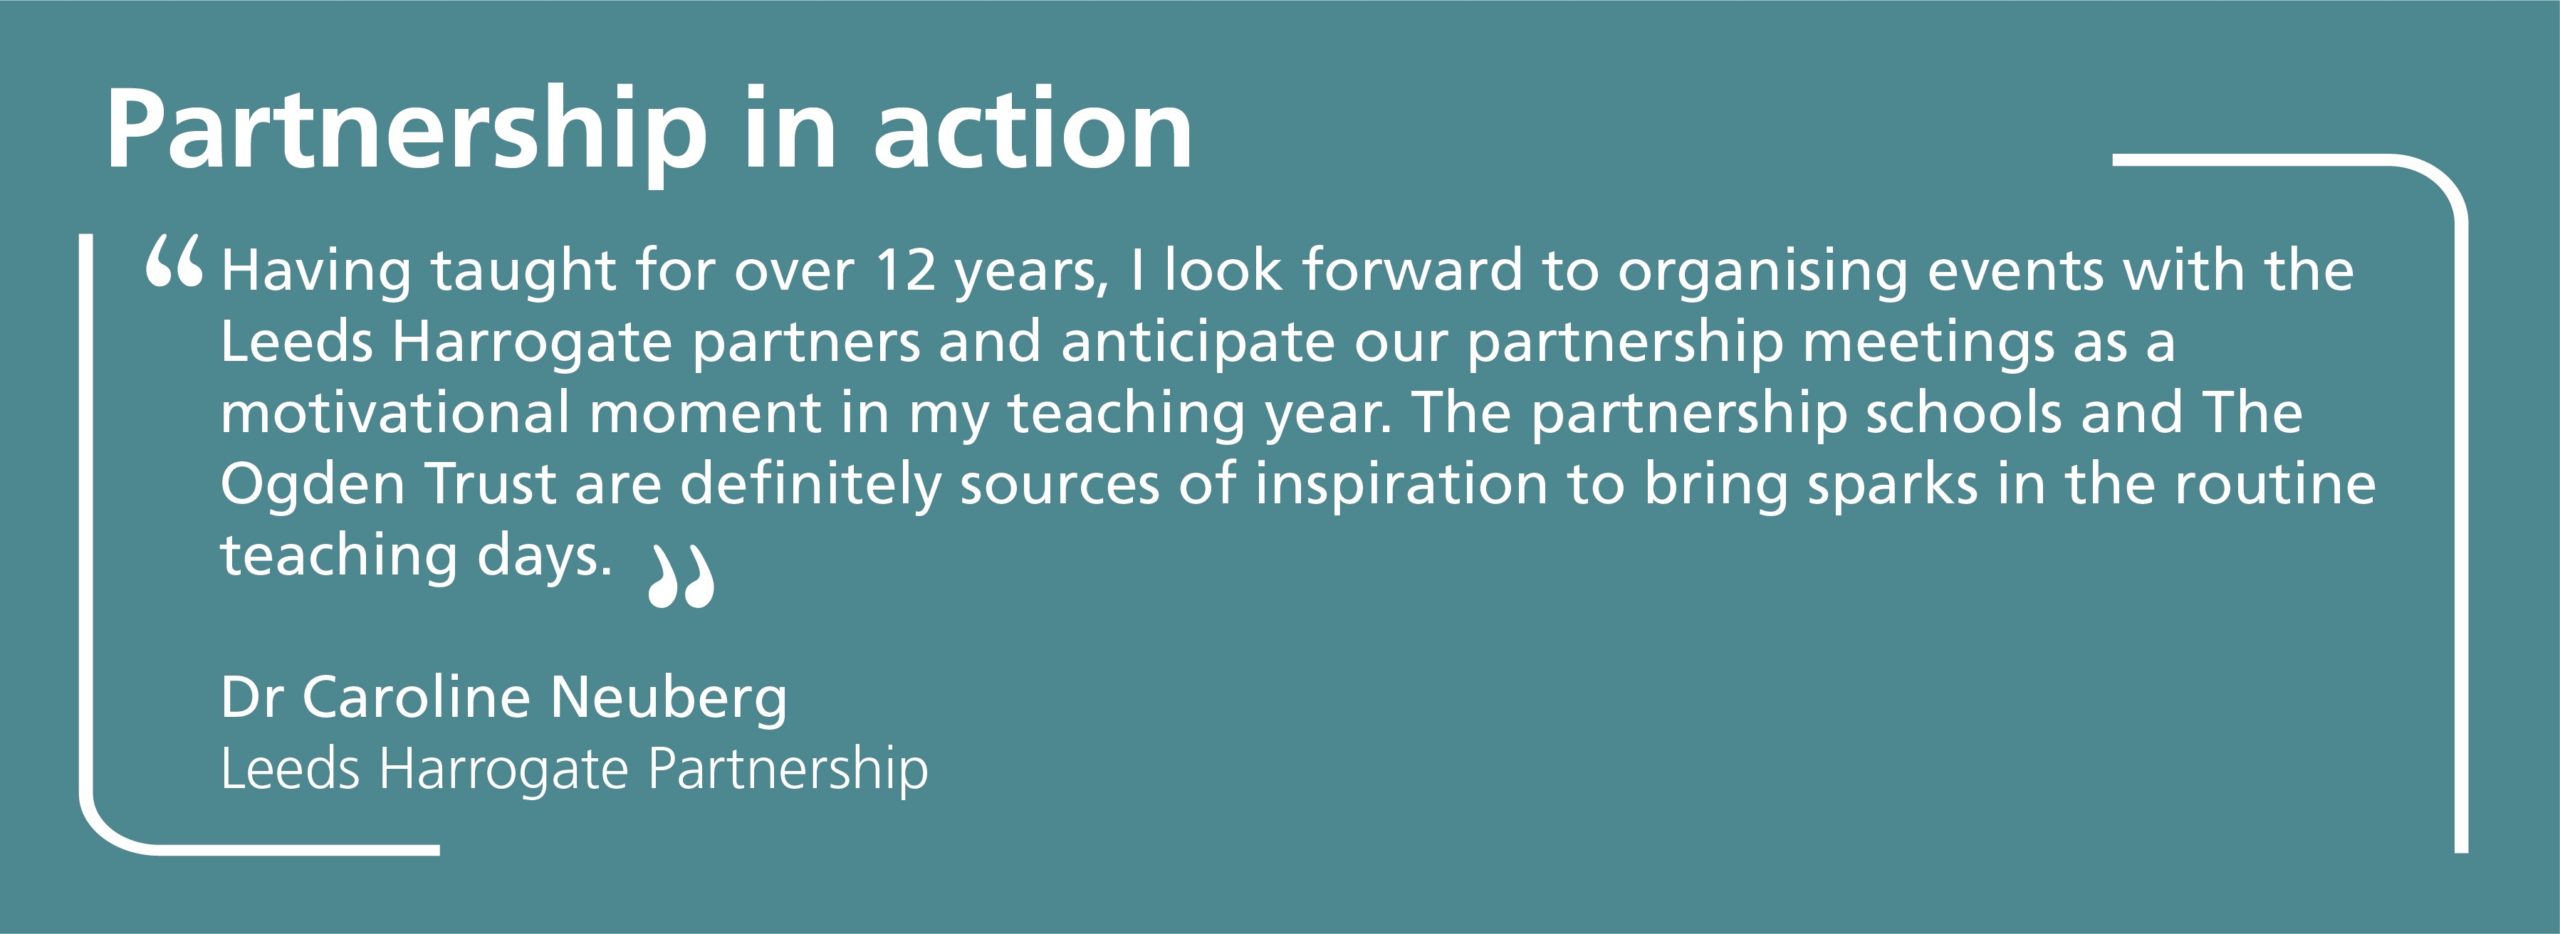 Having taught for over 12 years, I look forward to organising events with the Leeds Harrogate partners and anticipate our partnership meetings as a motivational moment in my teaching year. The partnership schools and The Ogden Trust are definitely sources of inspiration to bring sparks in the routine teaching days